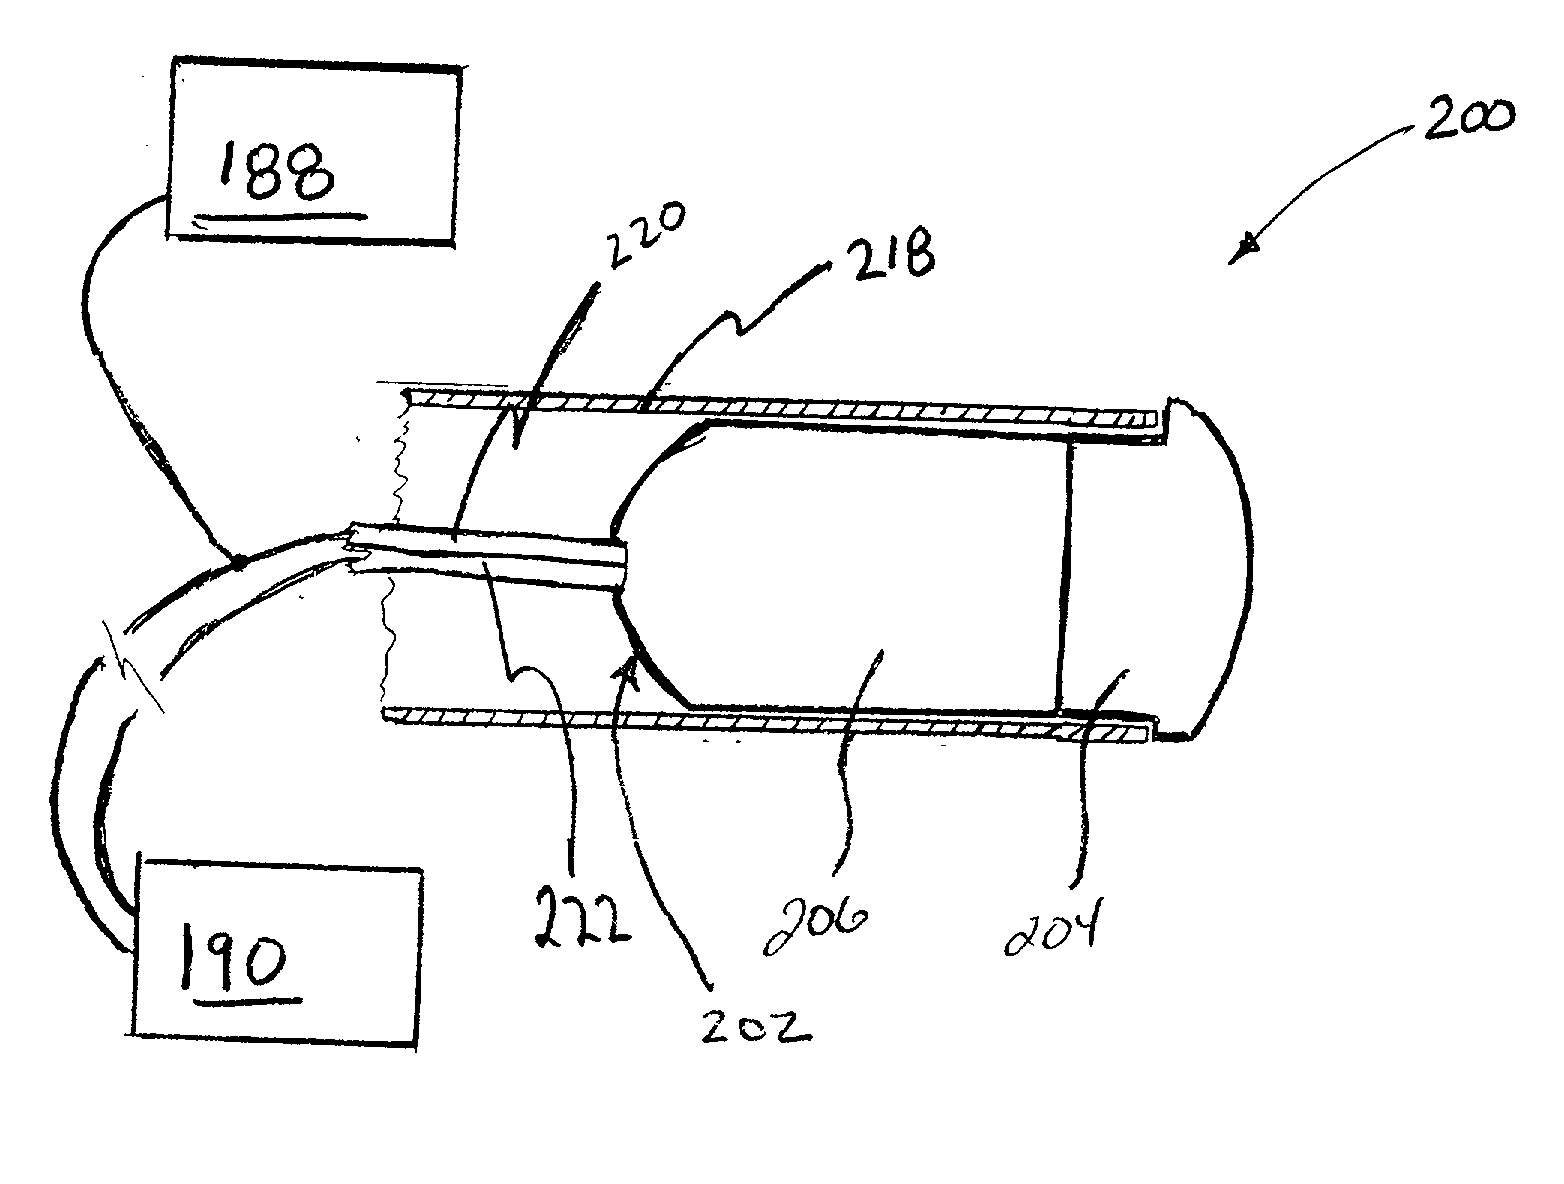 Devices for applying energy to tissue